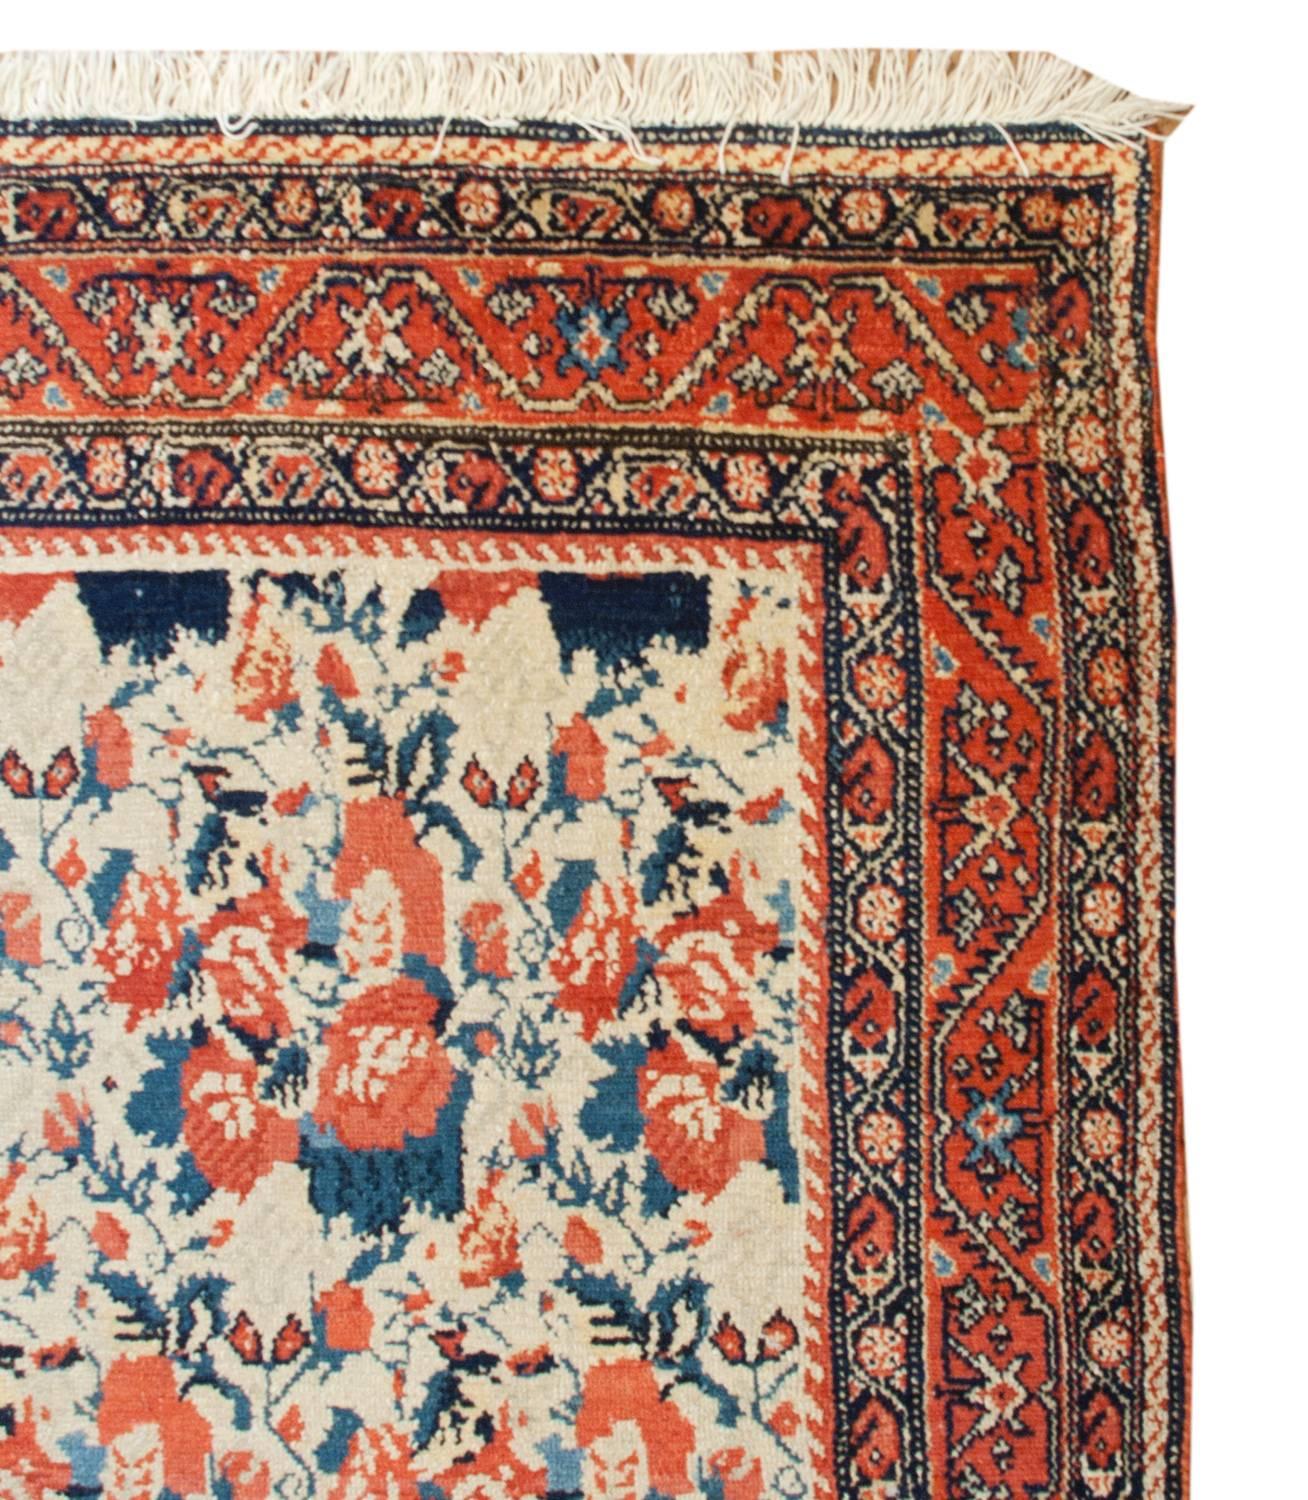 An outstanding late 19th century Persian Senneh rug with an incredible masterfully woven large-scale repeated floral pattern woven in crimson and indigo on a natural wool background. The border is fantastic with three distinct floral and vine